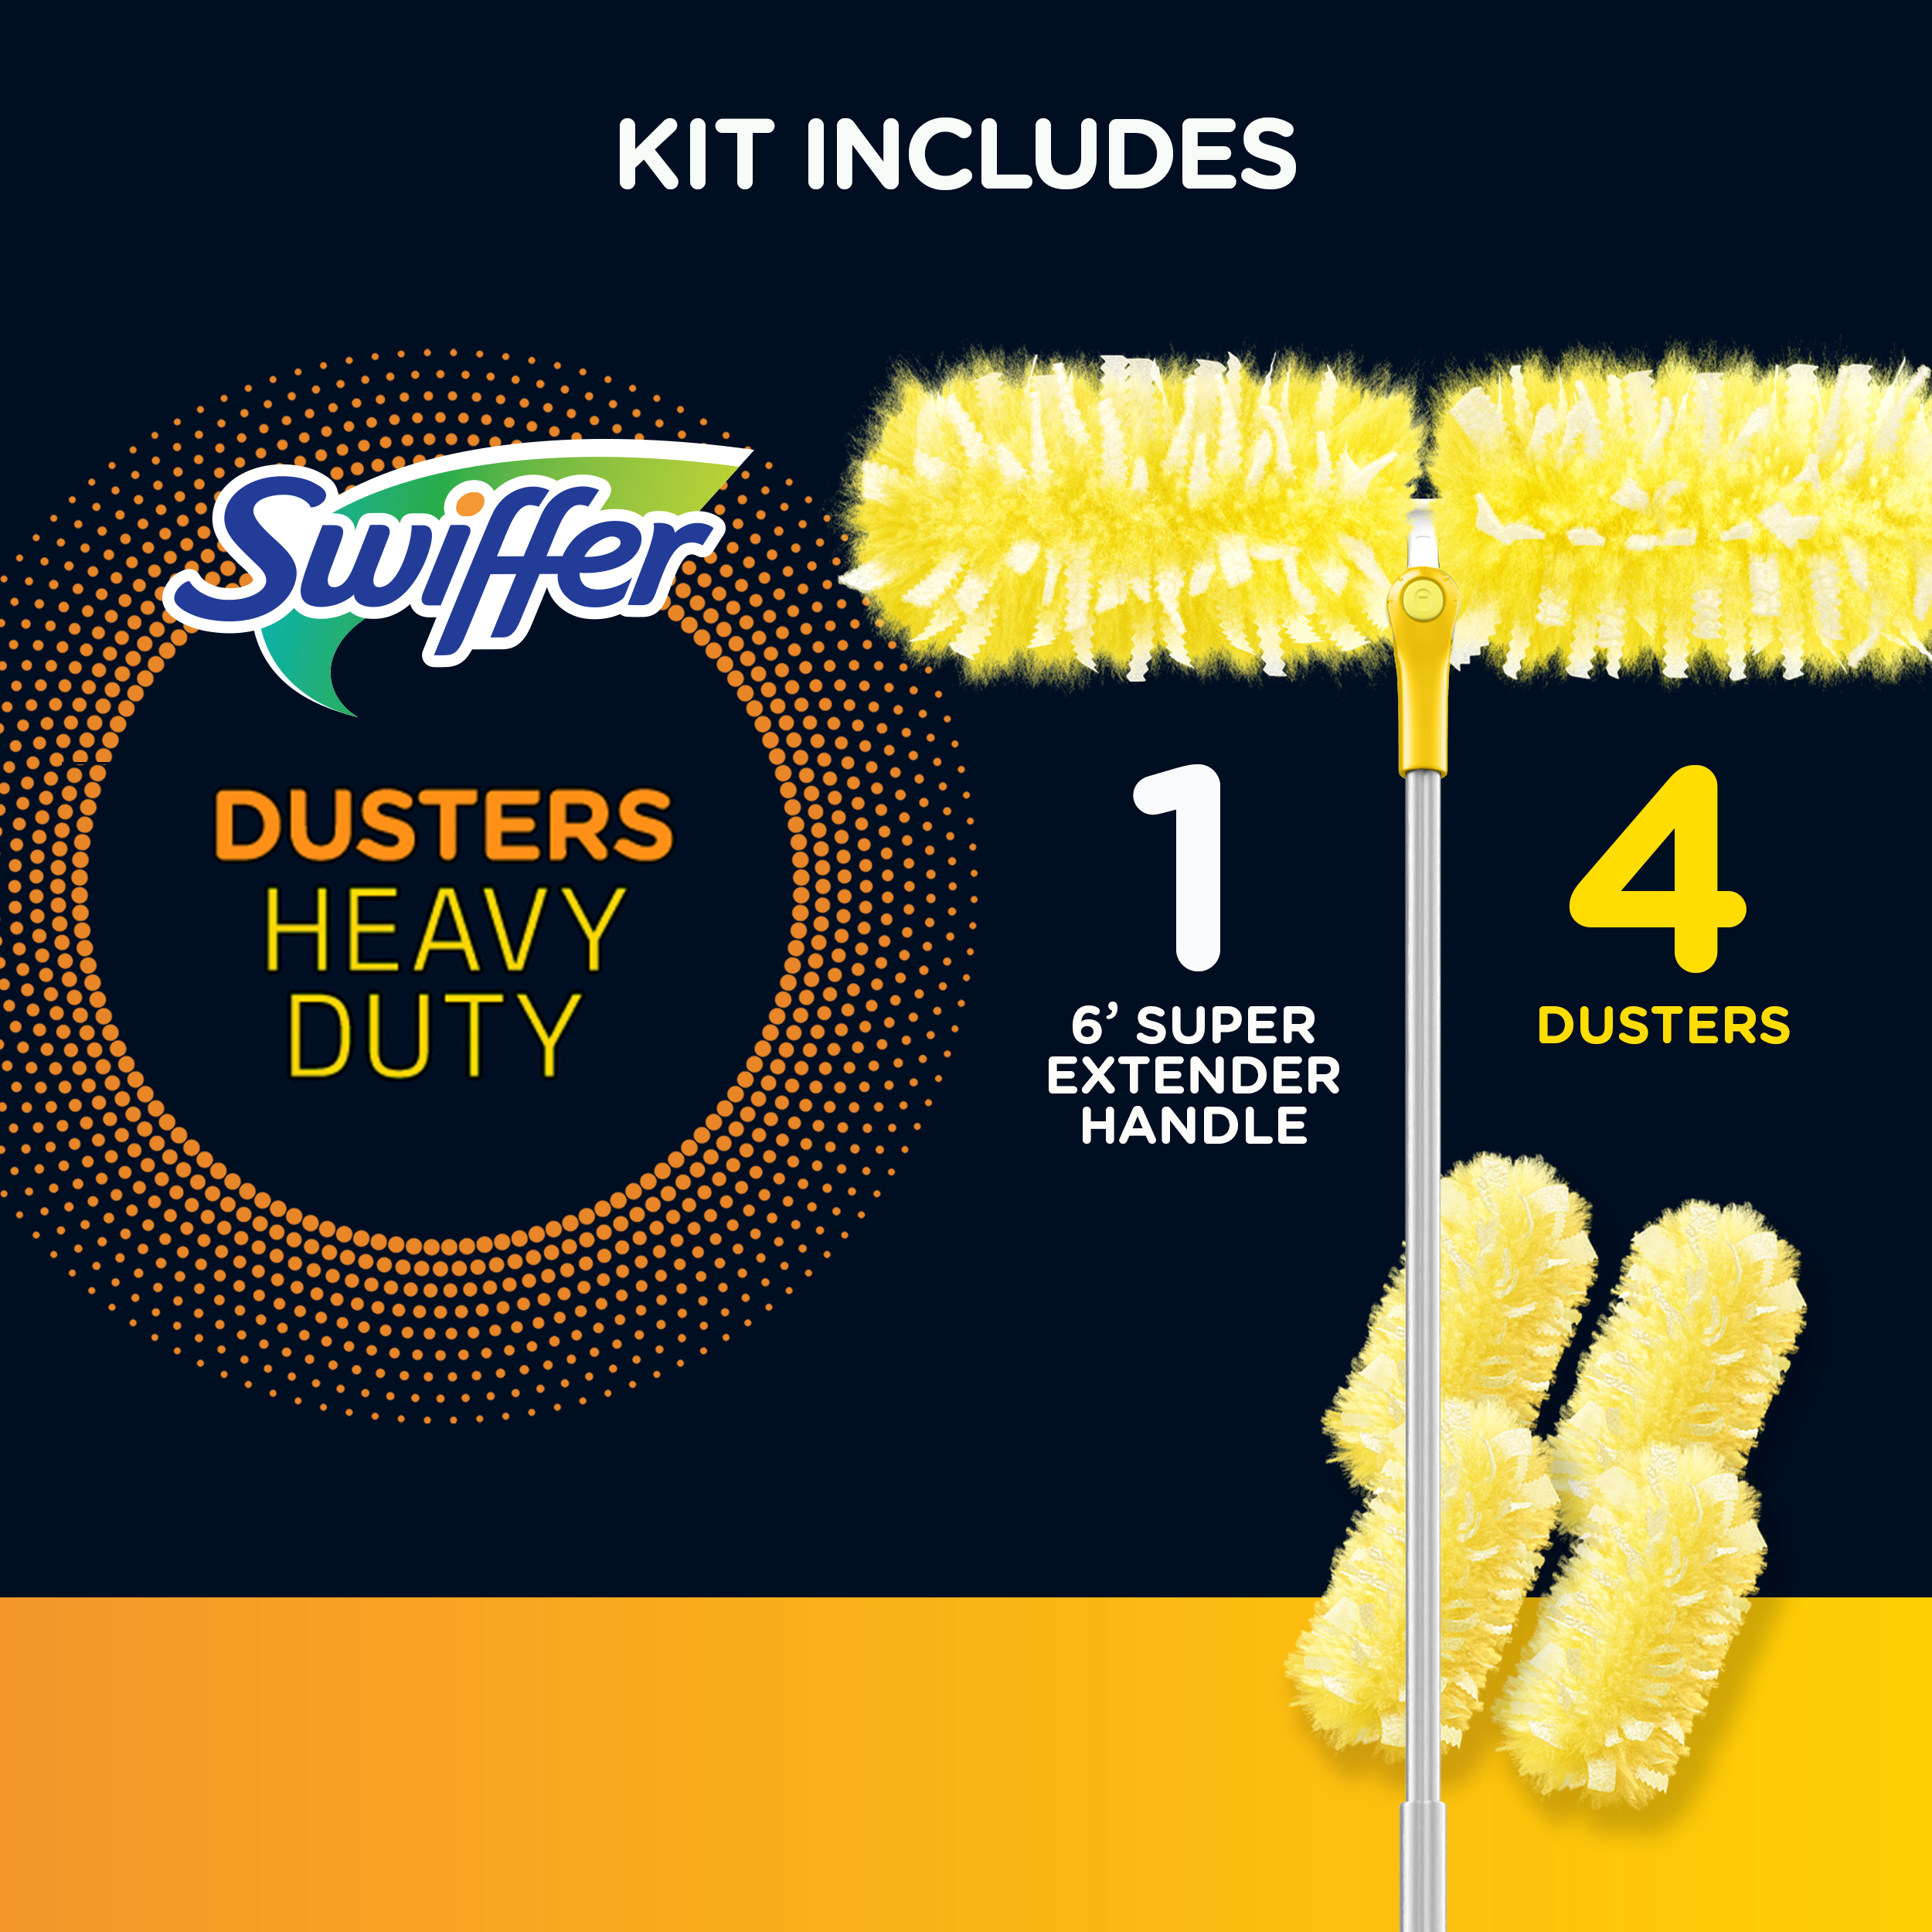 Swiffer Dusters Heavy Duty Super Extendable Handle Dusting Kit (1 6Ft. Handle, 4 Dusters) - image 4 of 11